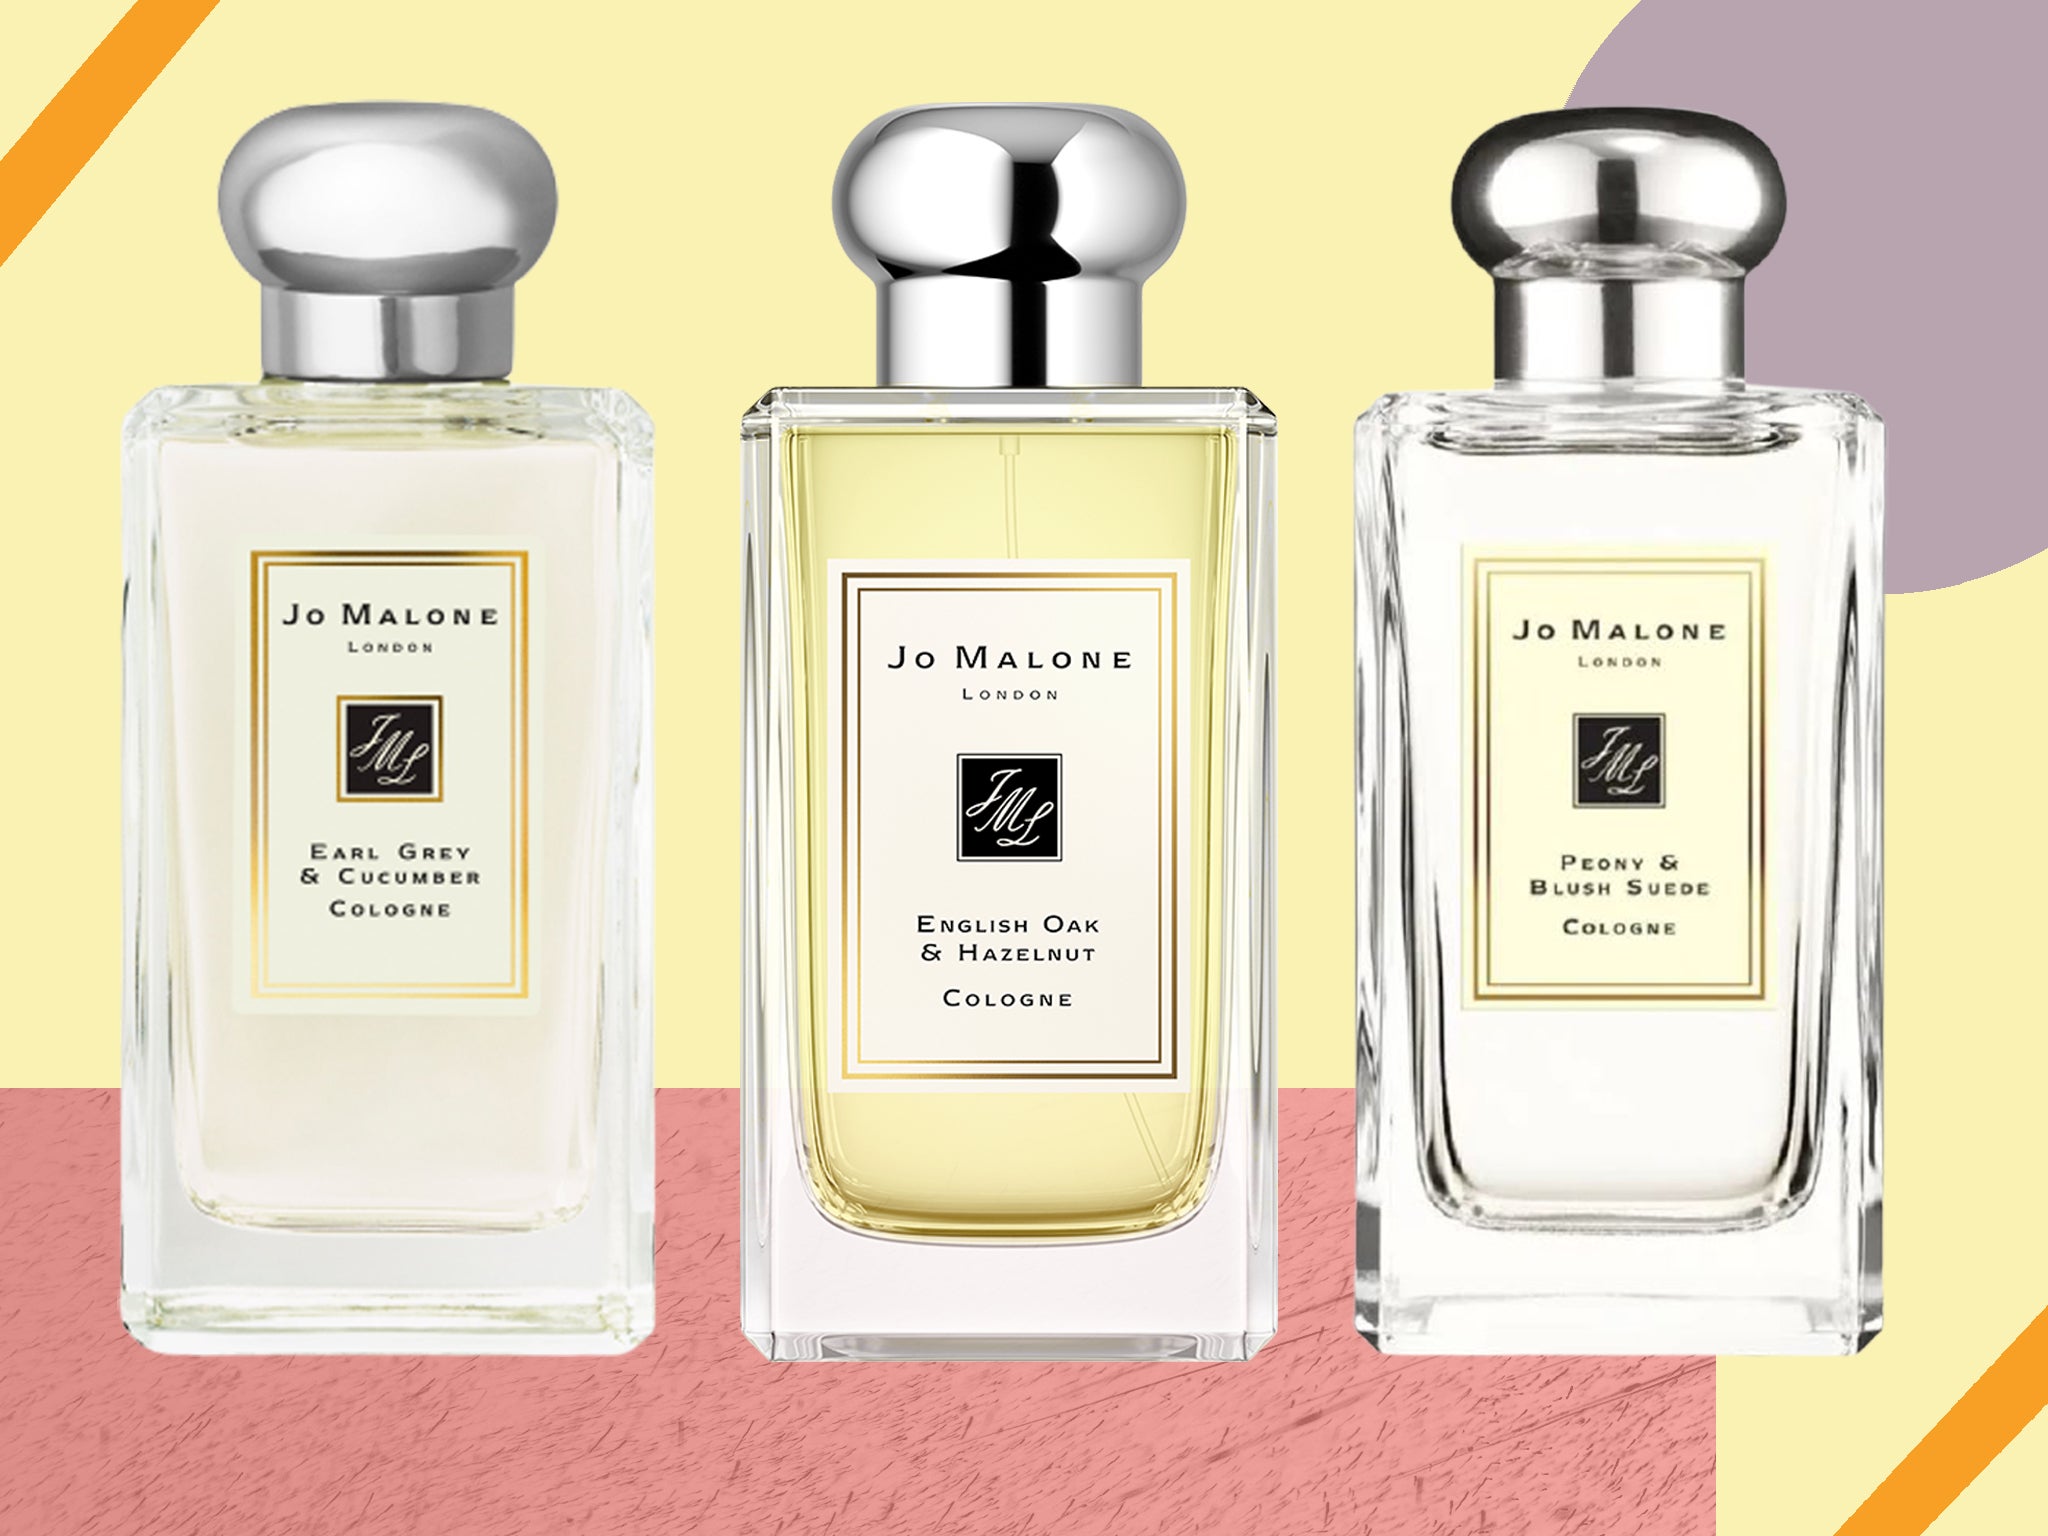 Best Jo Malone fragrance: From warm earthy scents to delicate